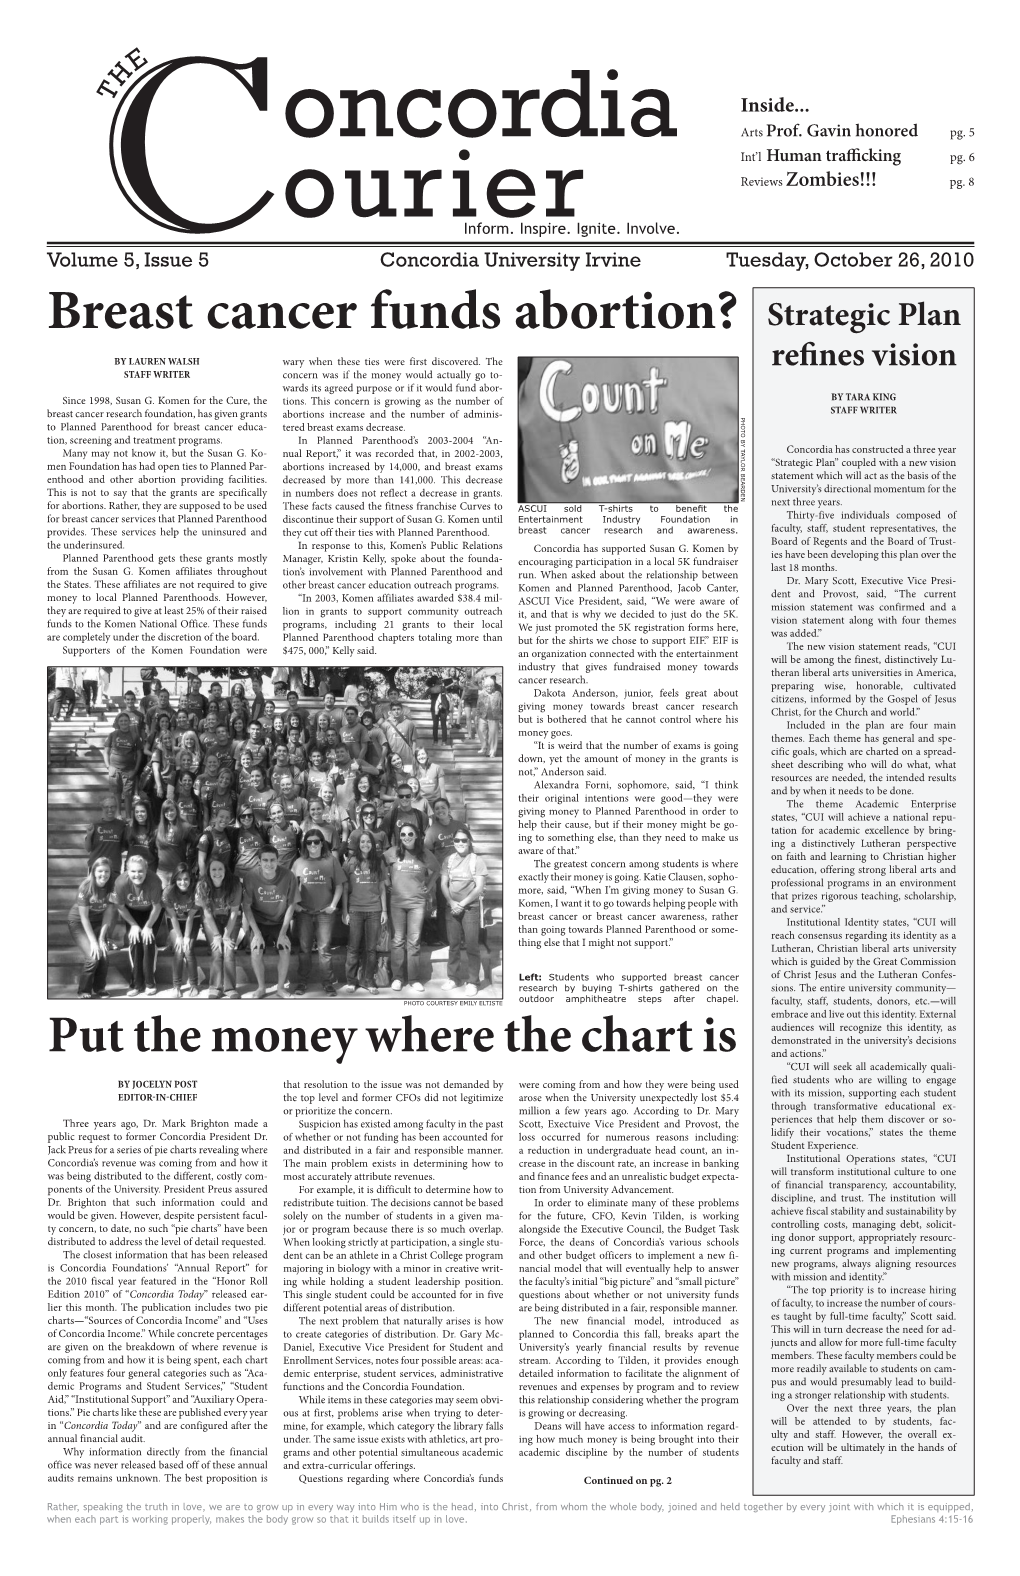 Breast Cancer Funds Abortion? Strategic Plan by LAUREN WALSH Wary When These Ties Were First Discovered